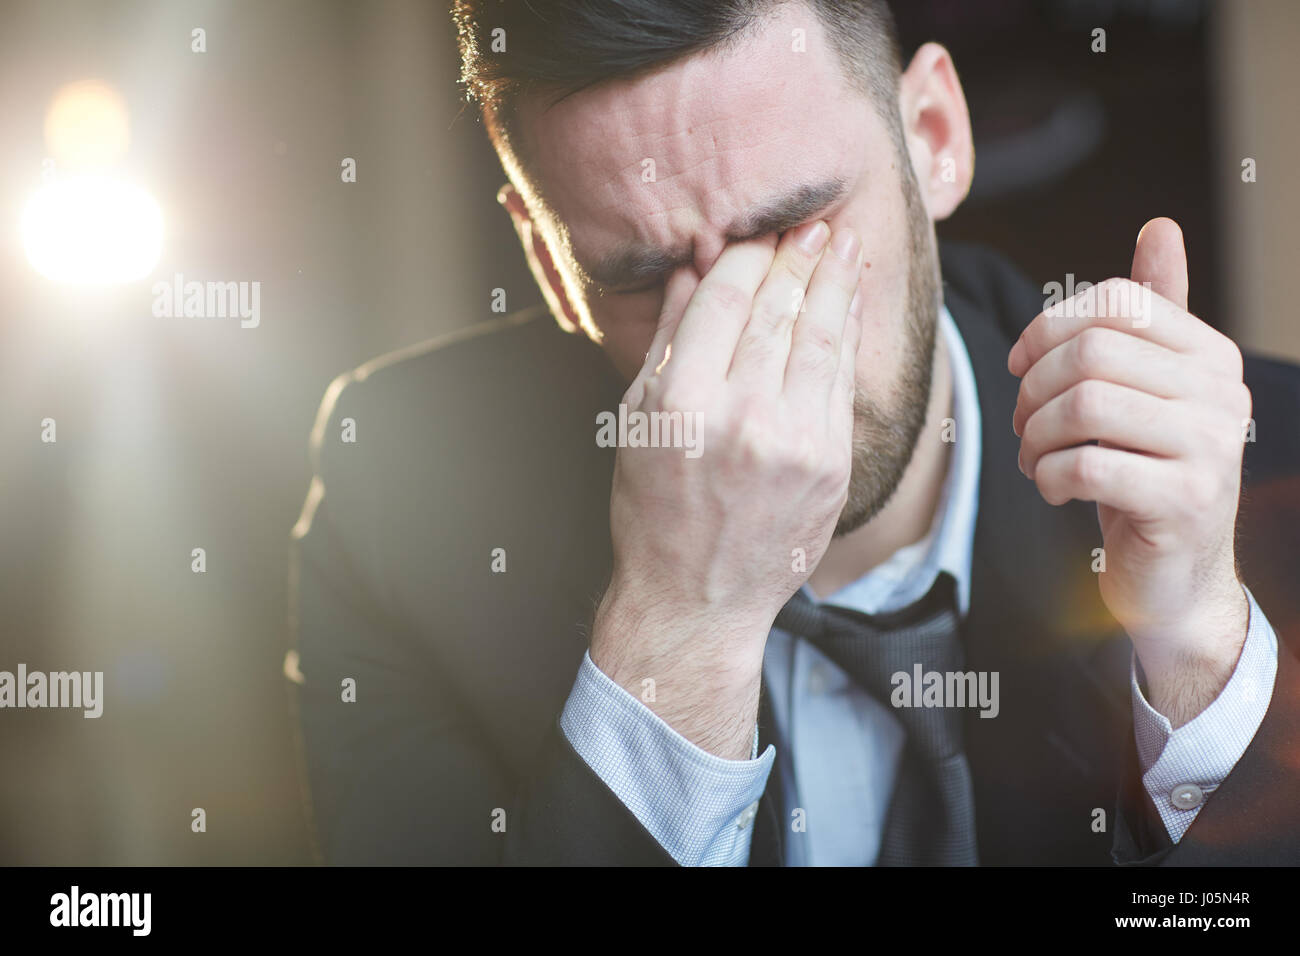 Portrait of tired adult man rubbing eyes and crying against black background with lens flare Stock Photo